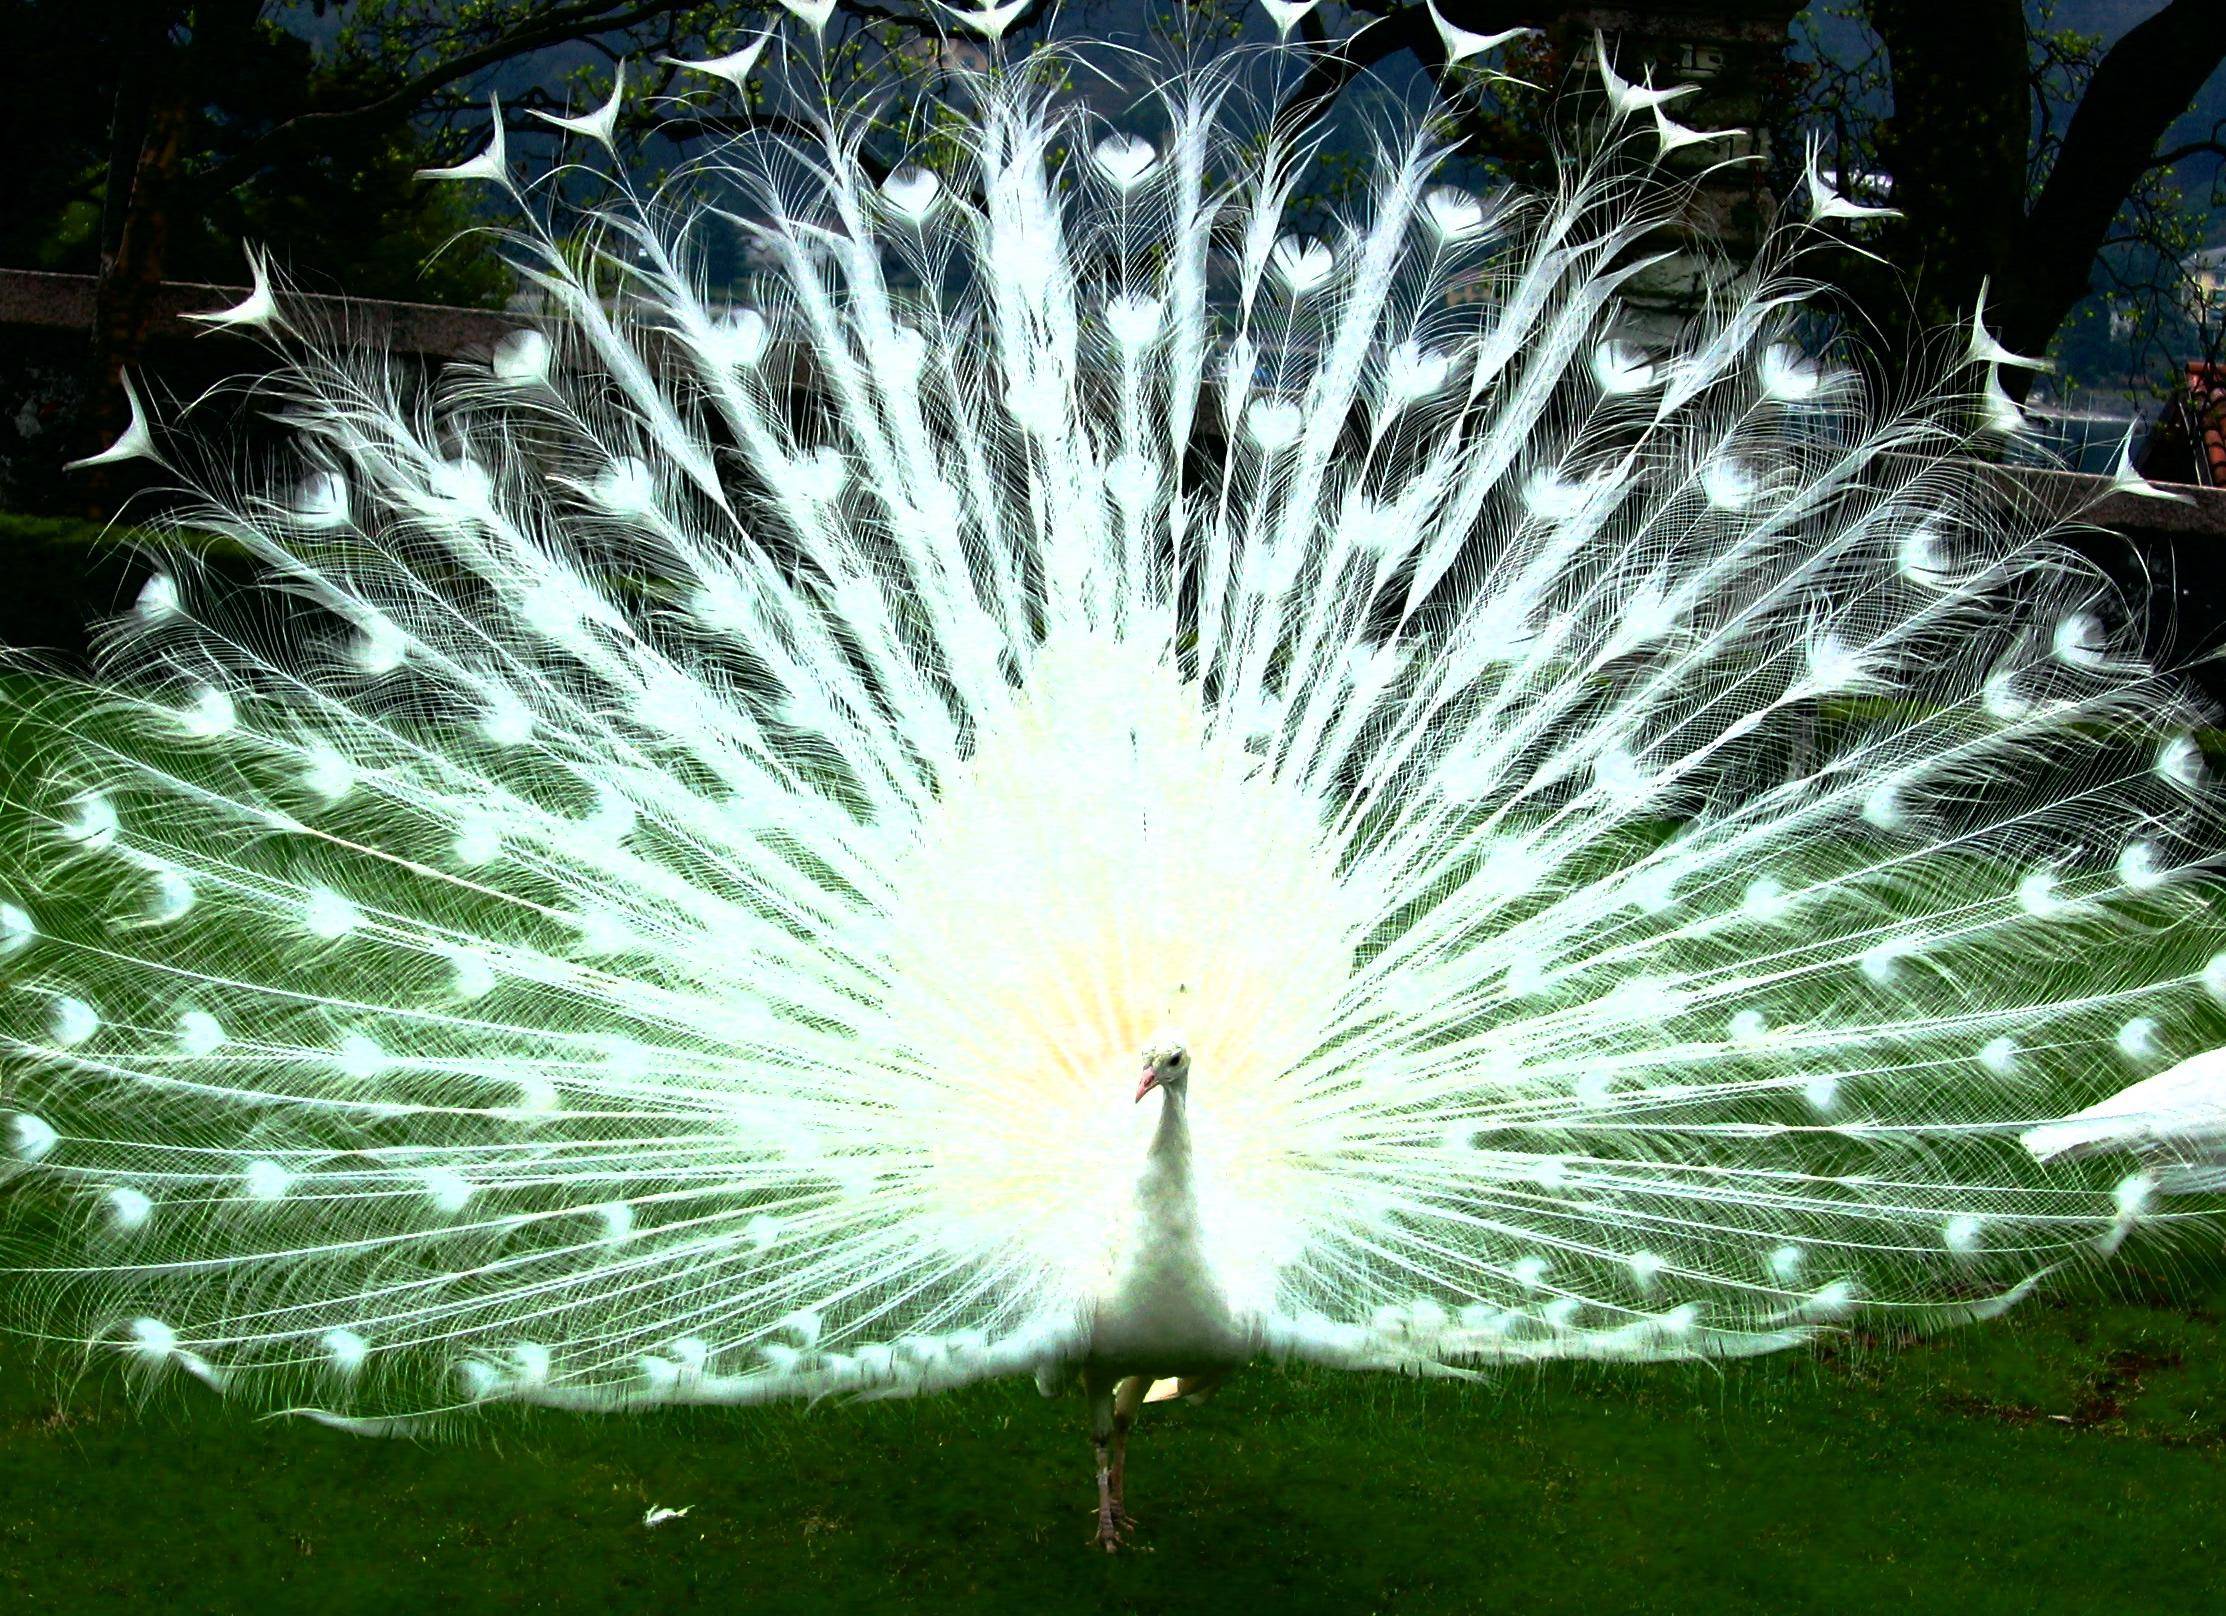 White Peacock Wallpapers - Wallpaper Cave